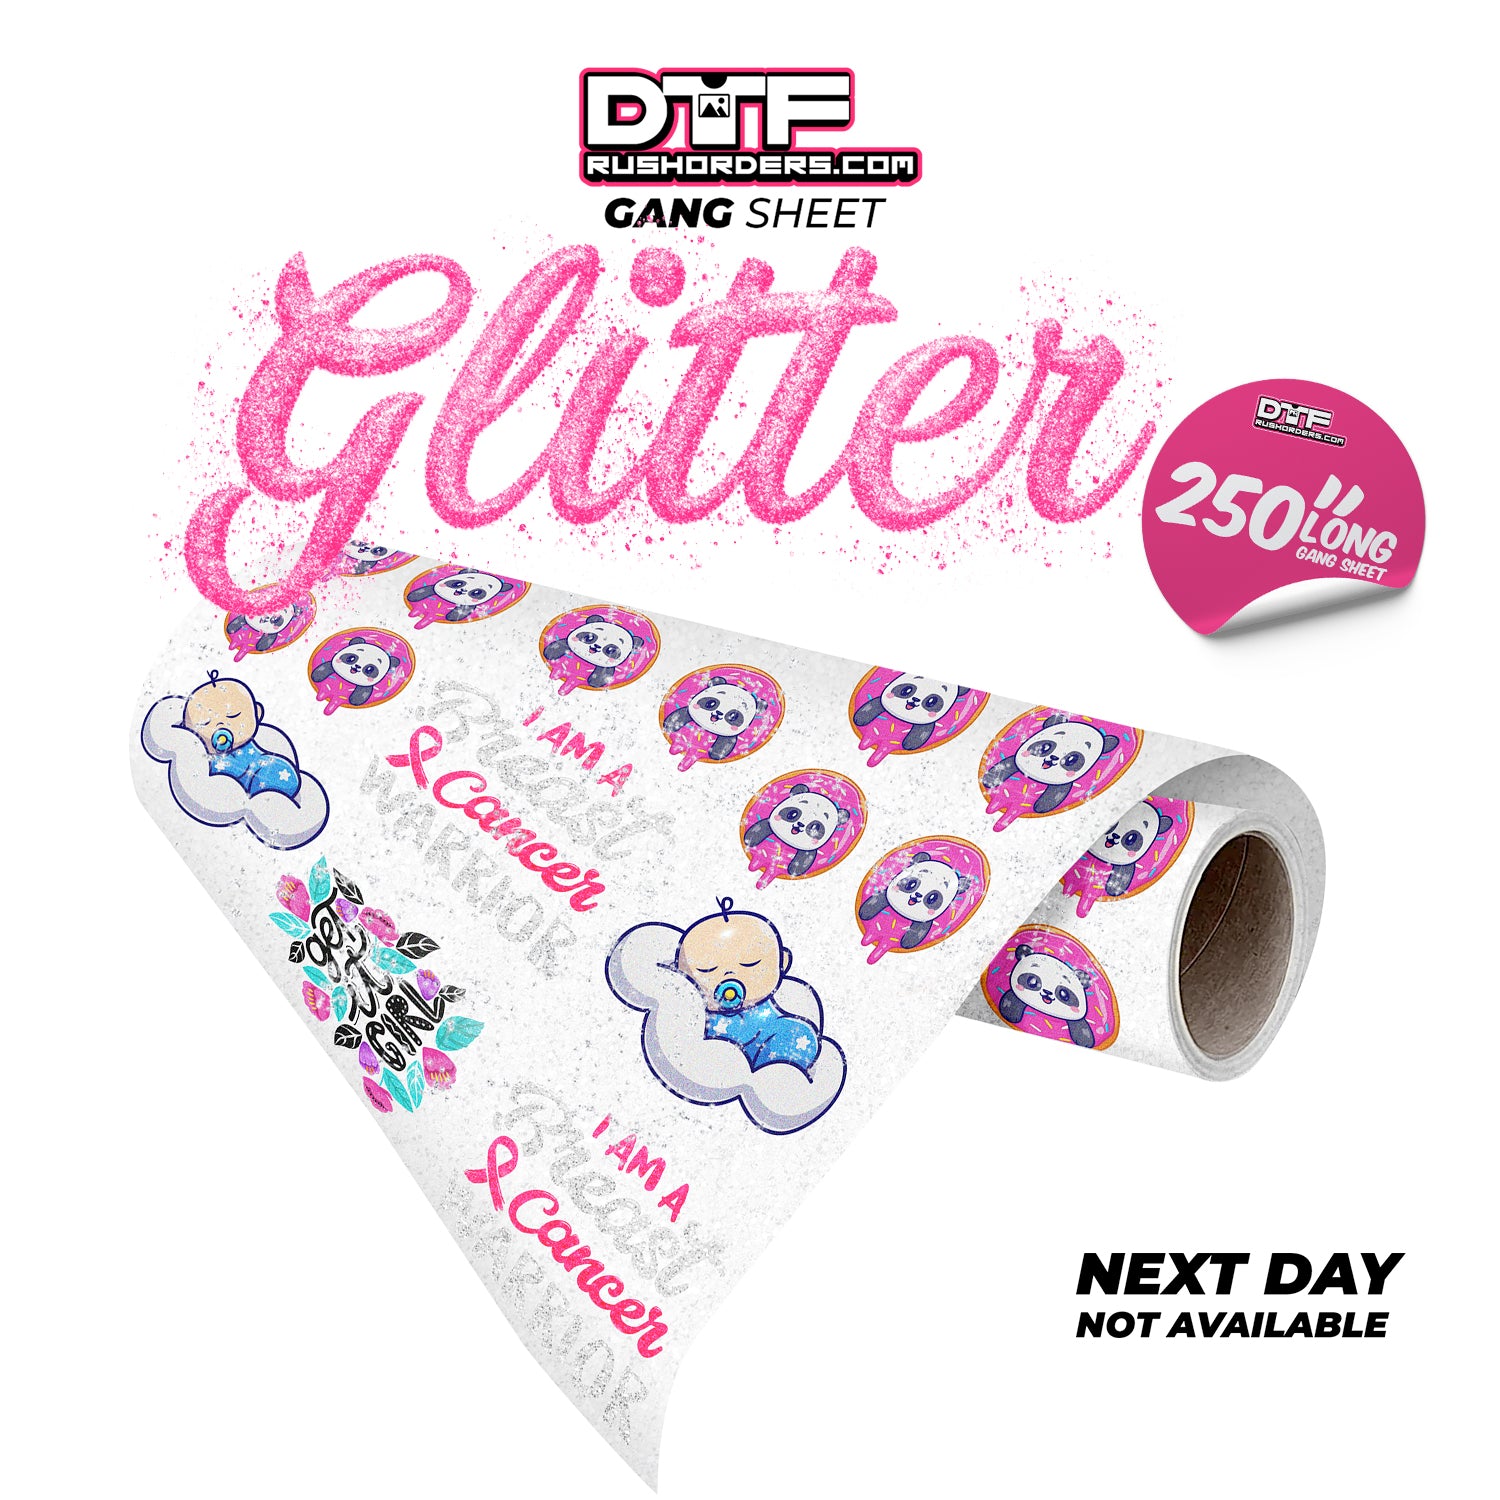 Custom Wholesale DTF Transfers - by DTF Rush Orders